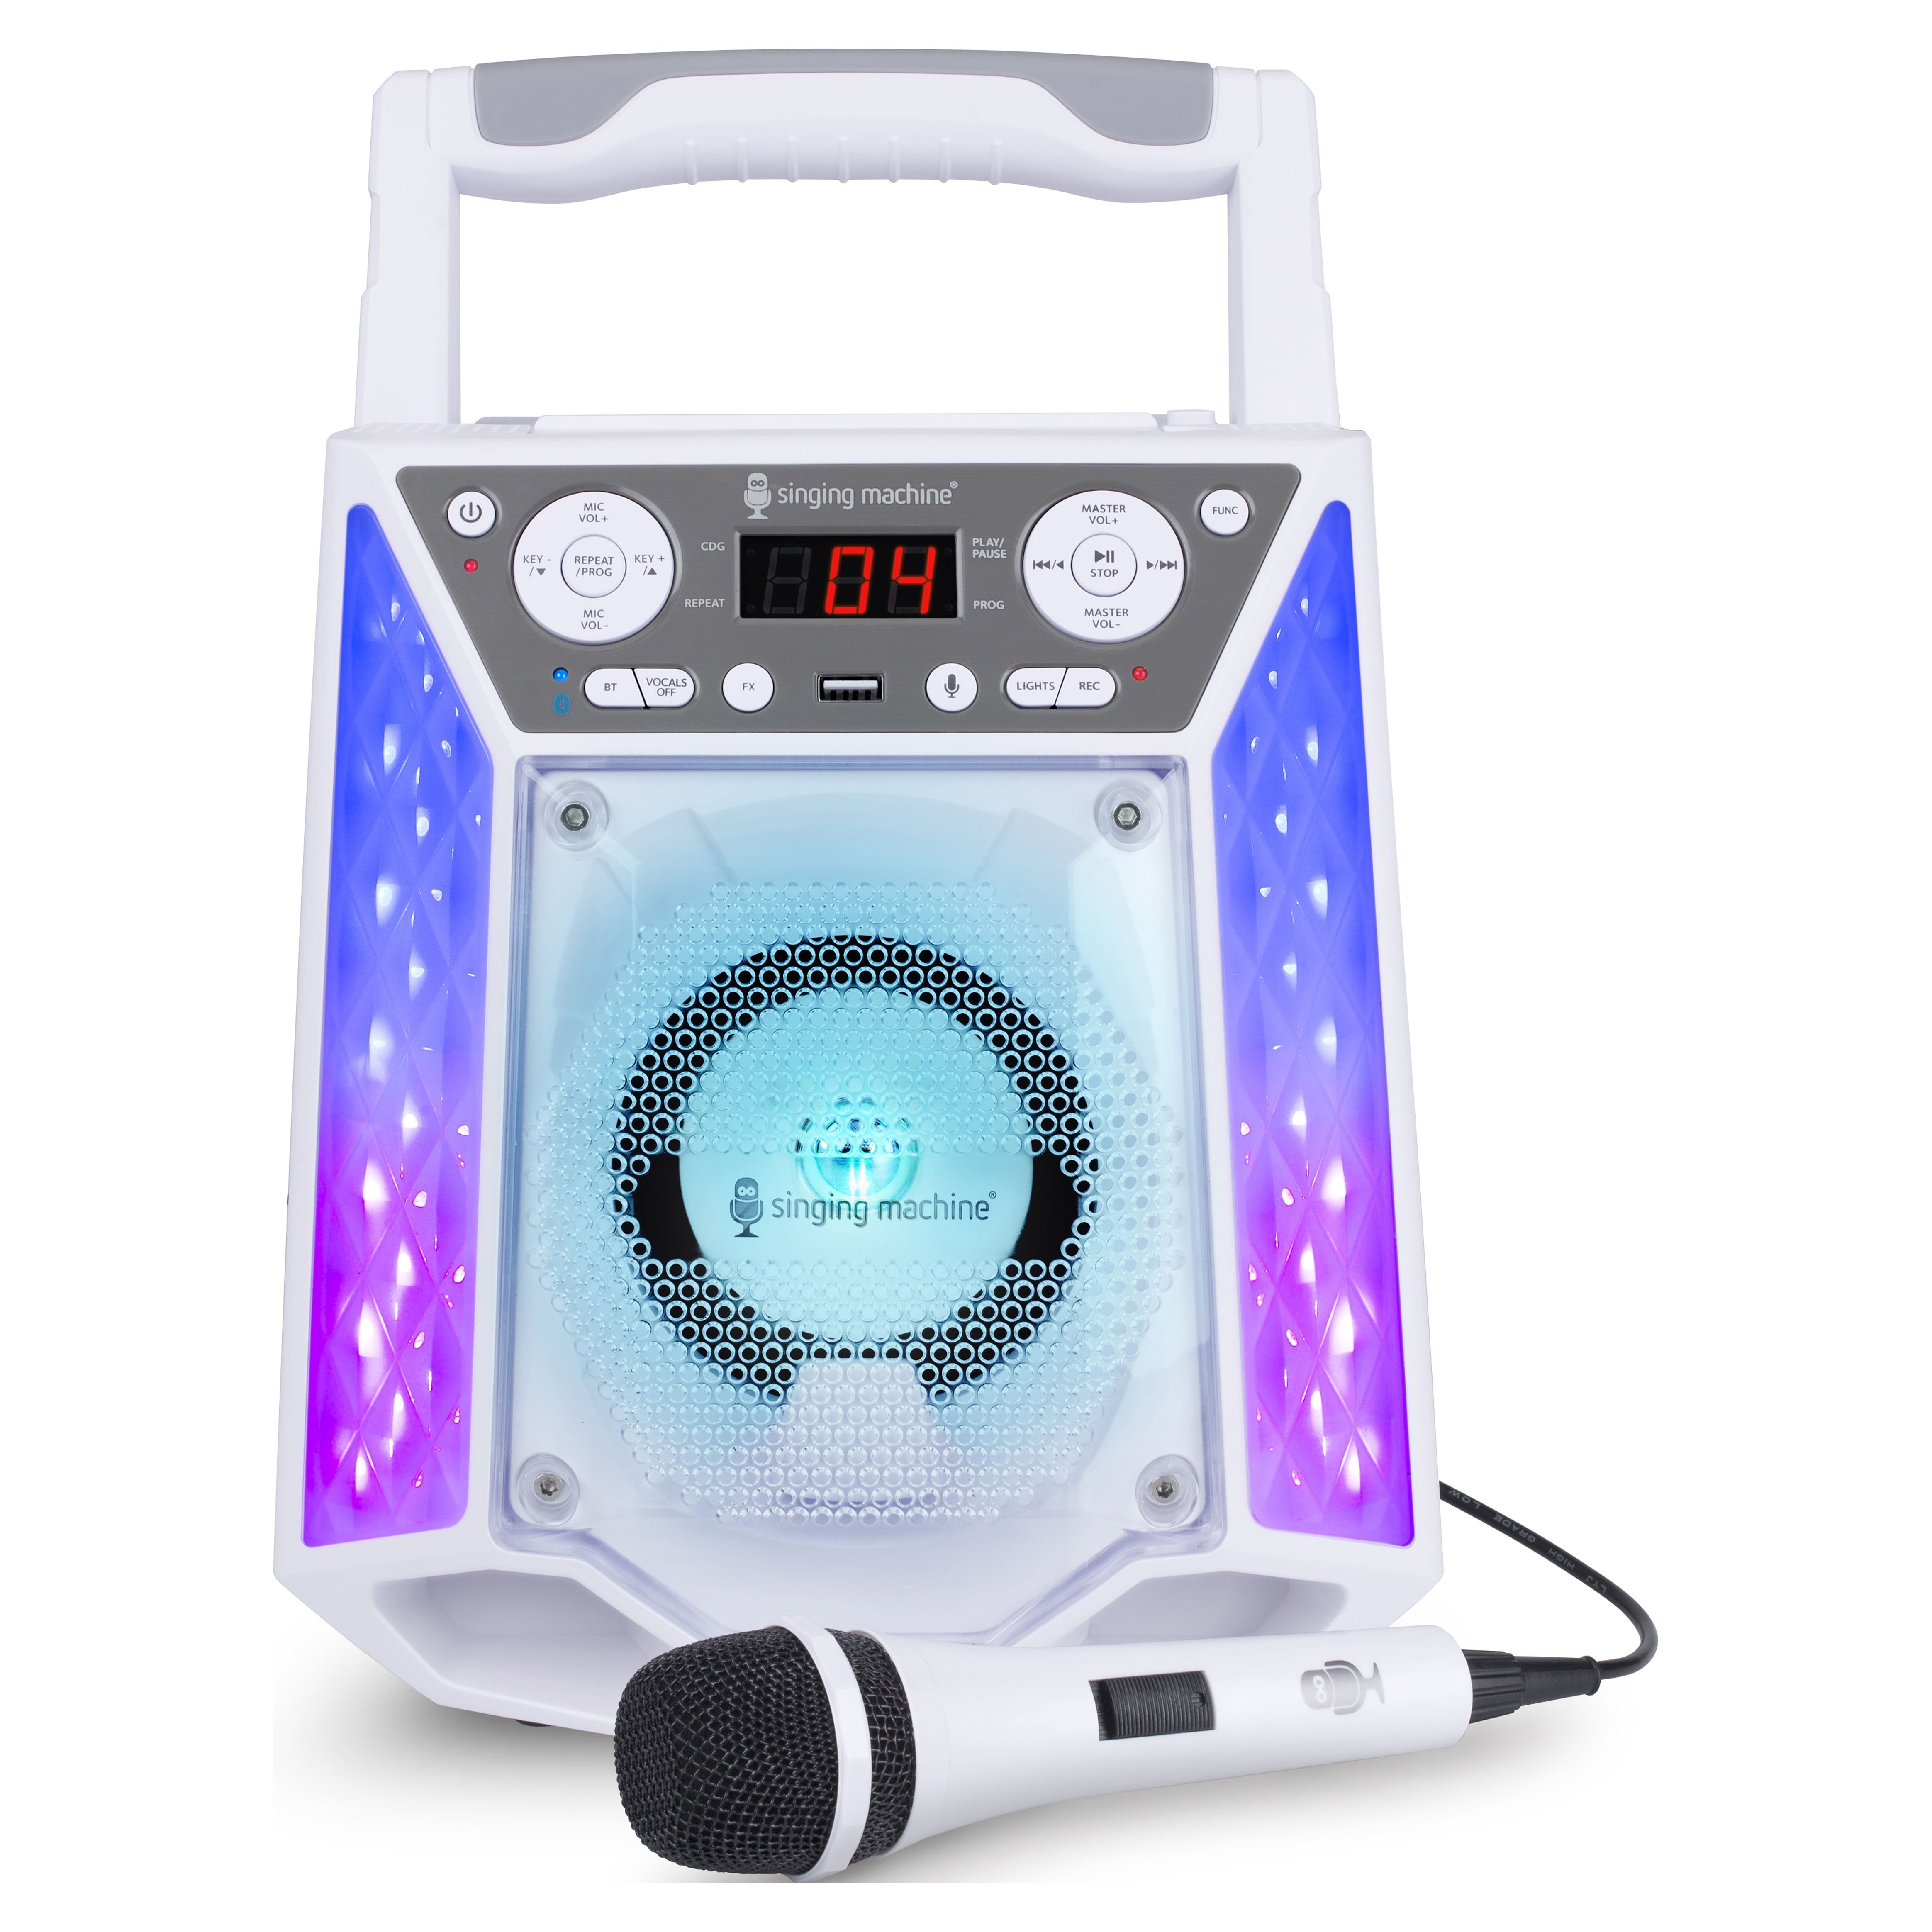 The Singing Machine Shine Voice SML2350 Karaoke Machine with Voice Assistant - image 3 of 7